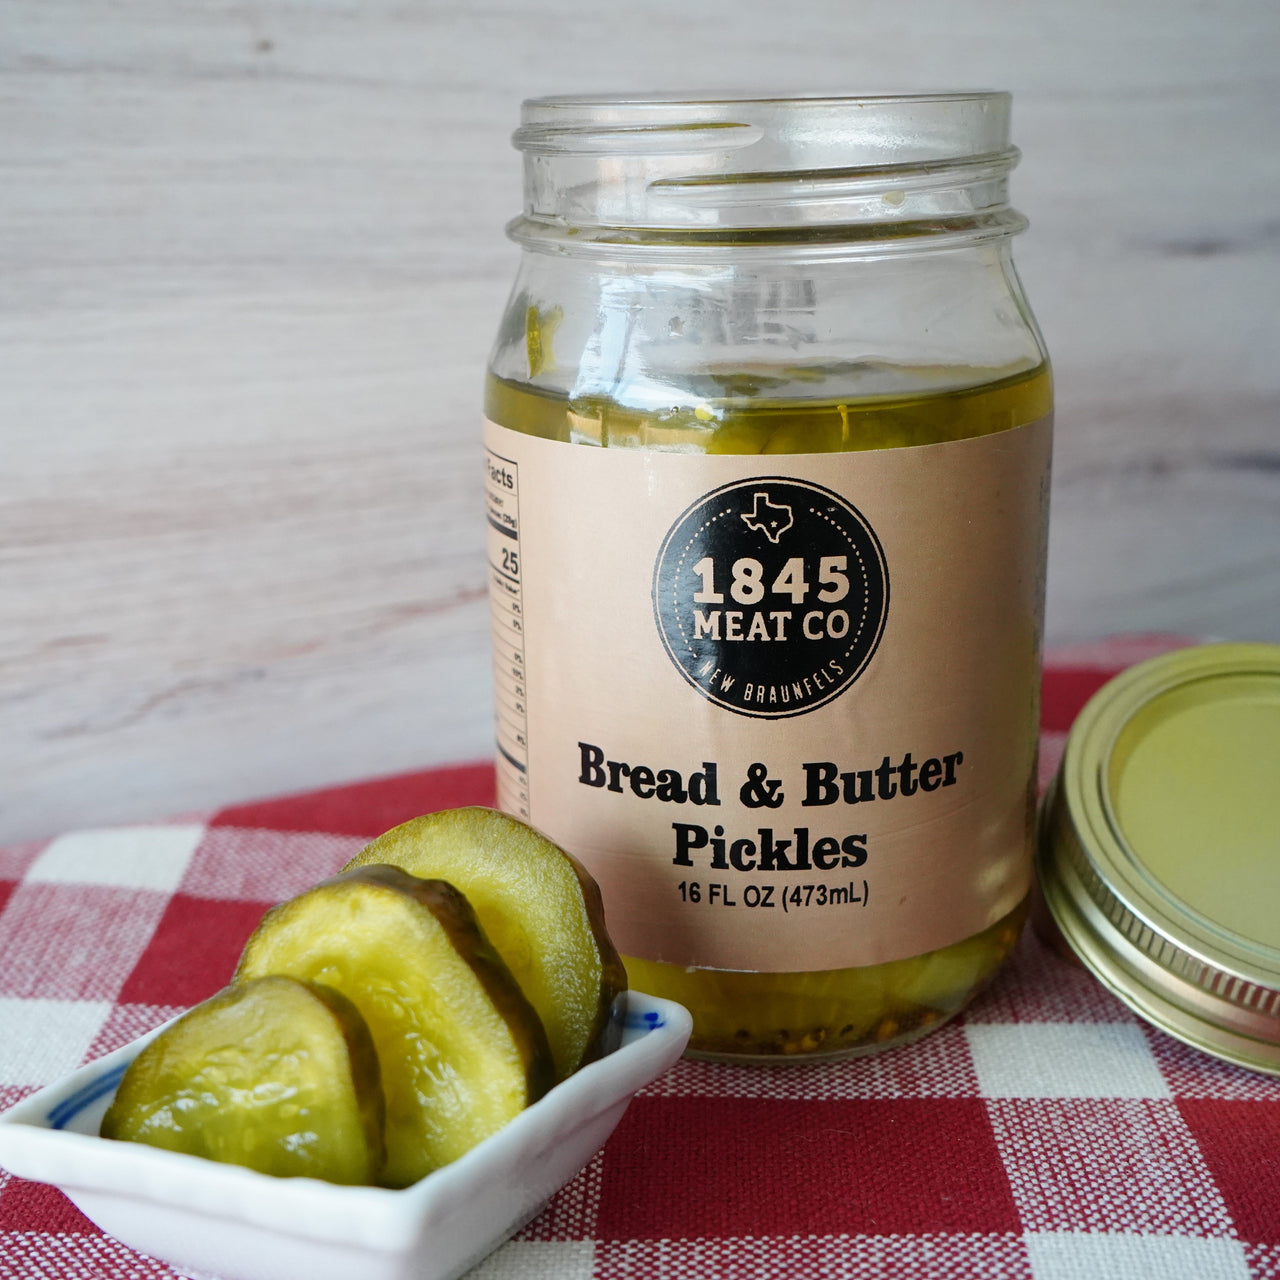 A little bit of sweetness to make a crispy bread and butter pickle.